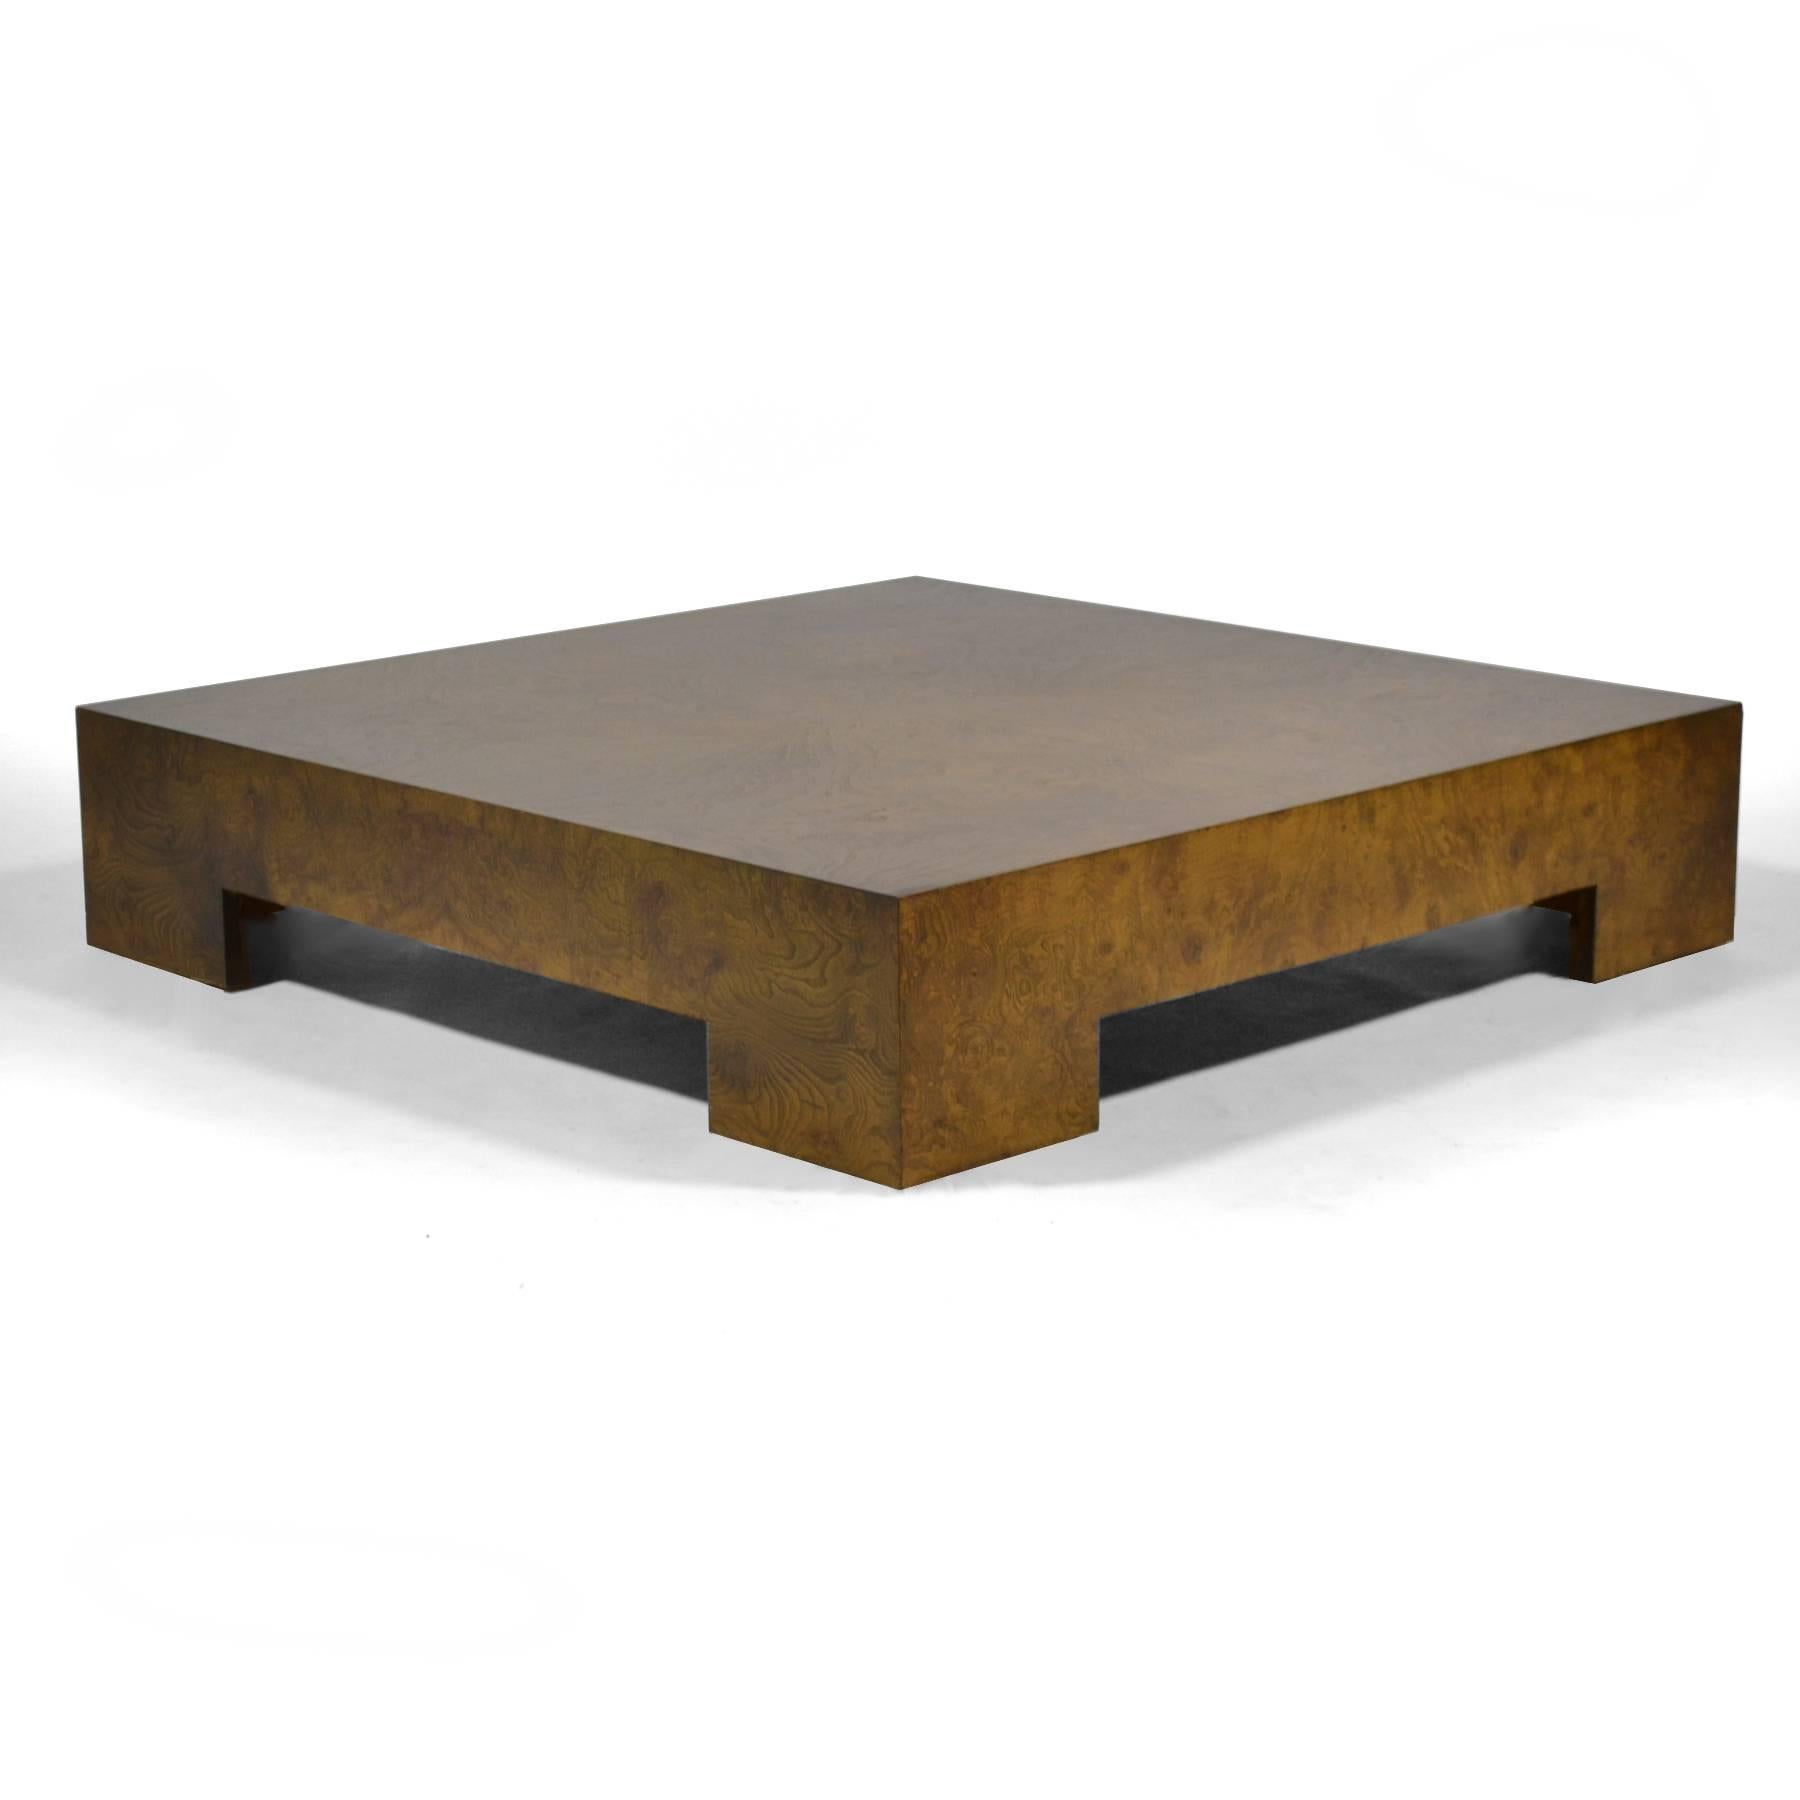 This wonderful coffee table designed by Milo Baughman uses an elegant minimalist form activated with a veneer of dark, rich, olive ash burl wood.